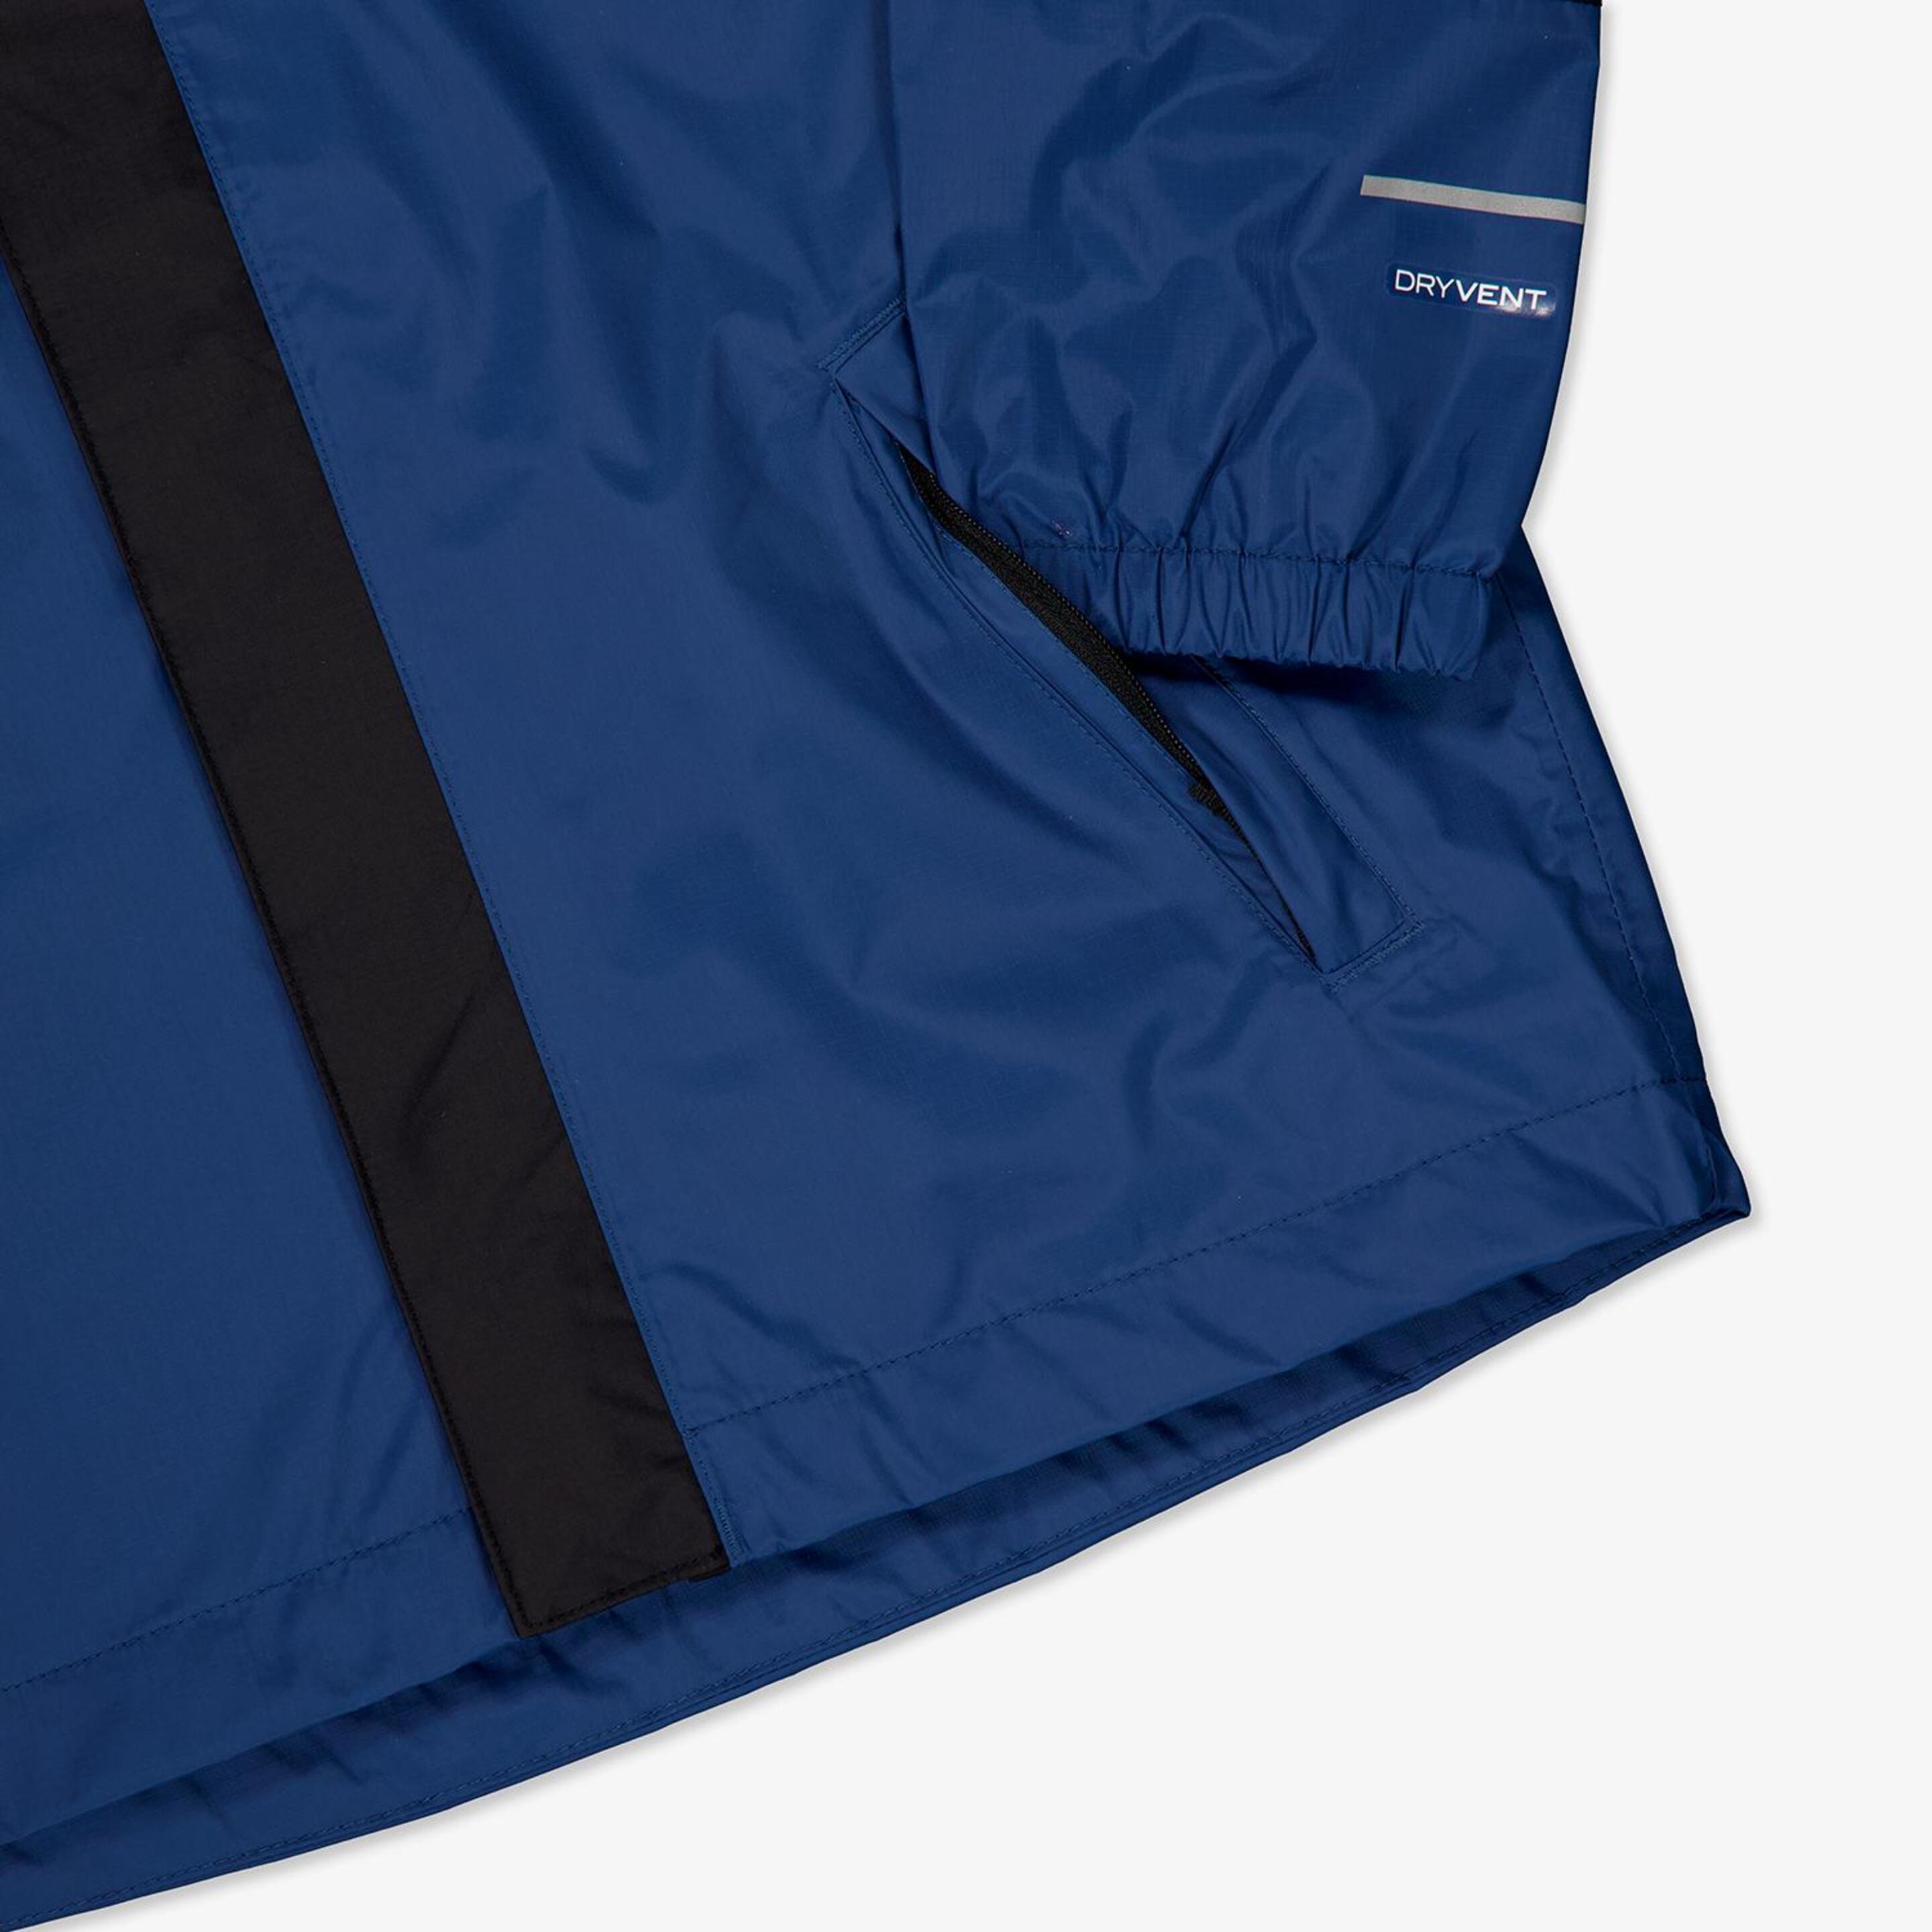 The North Face Antora